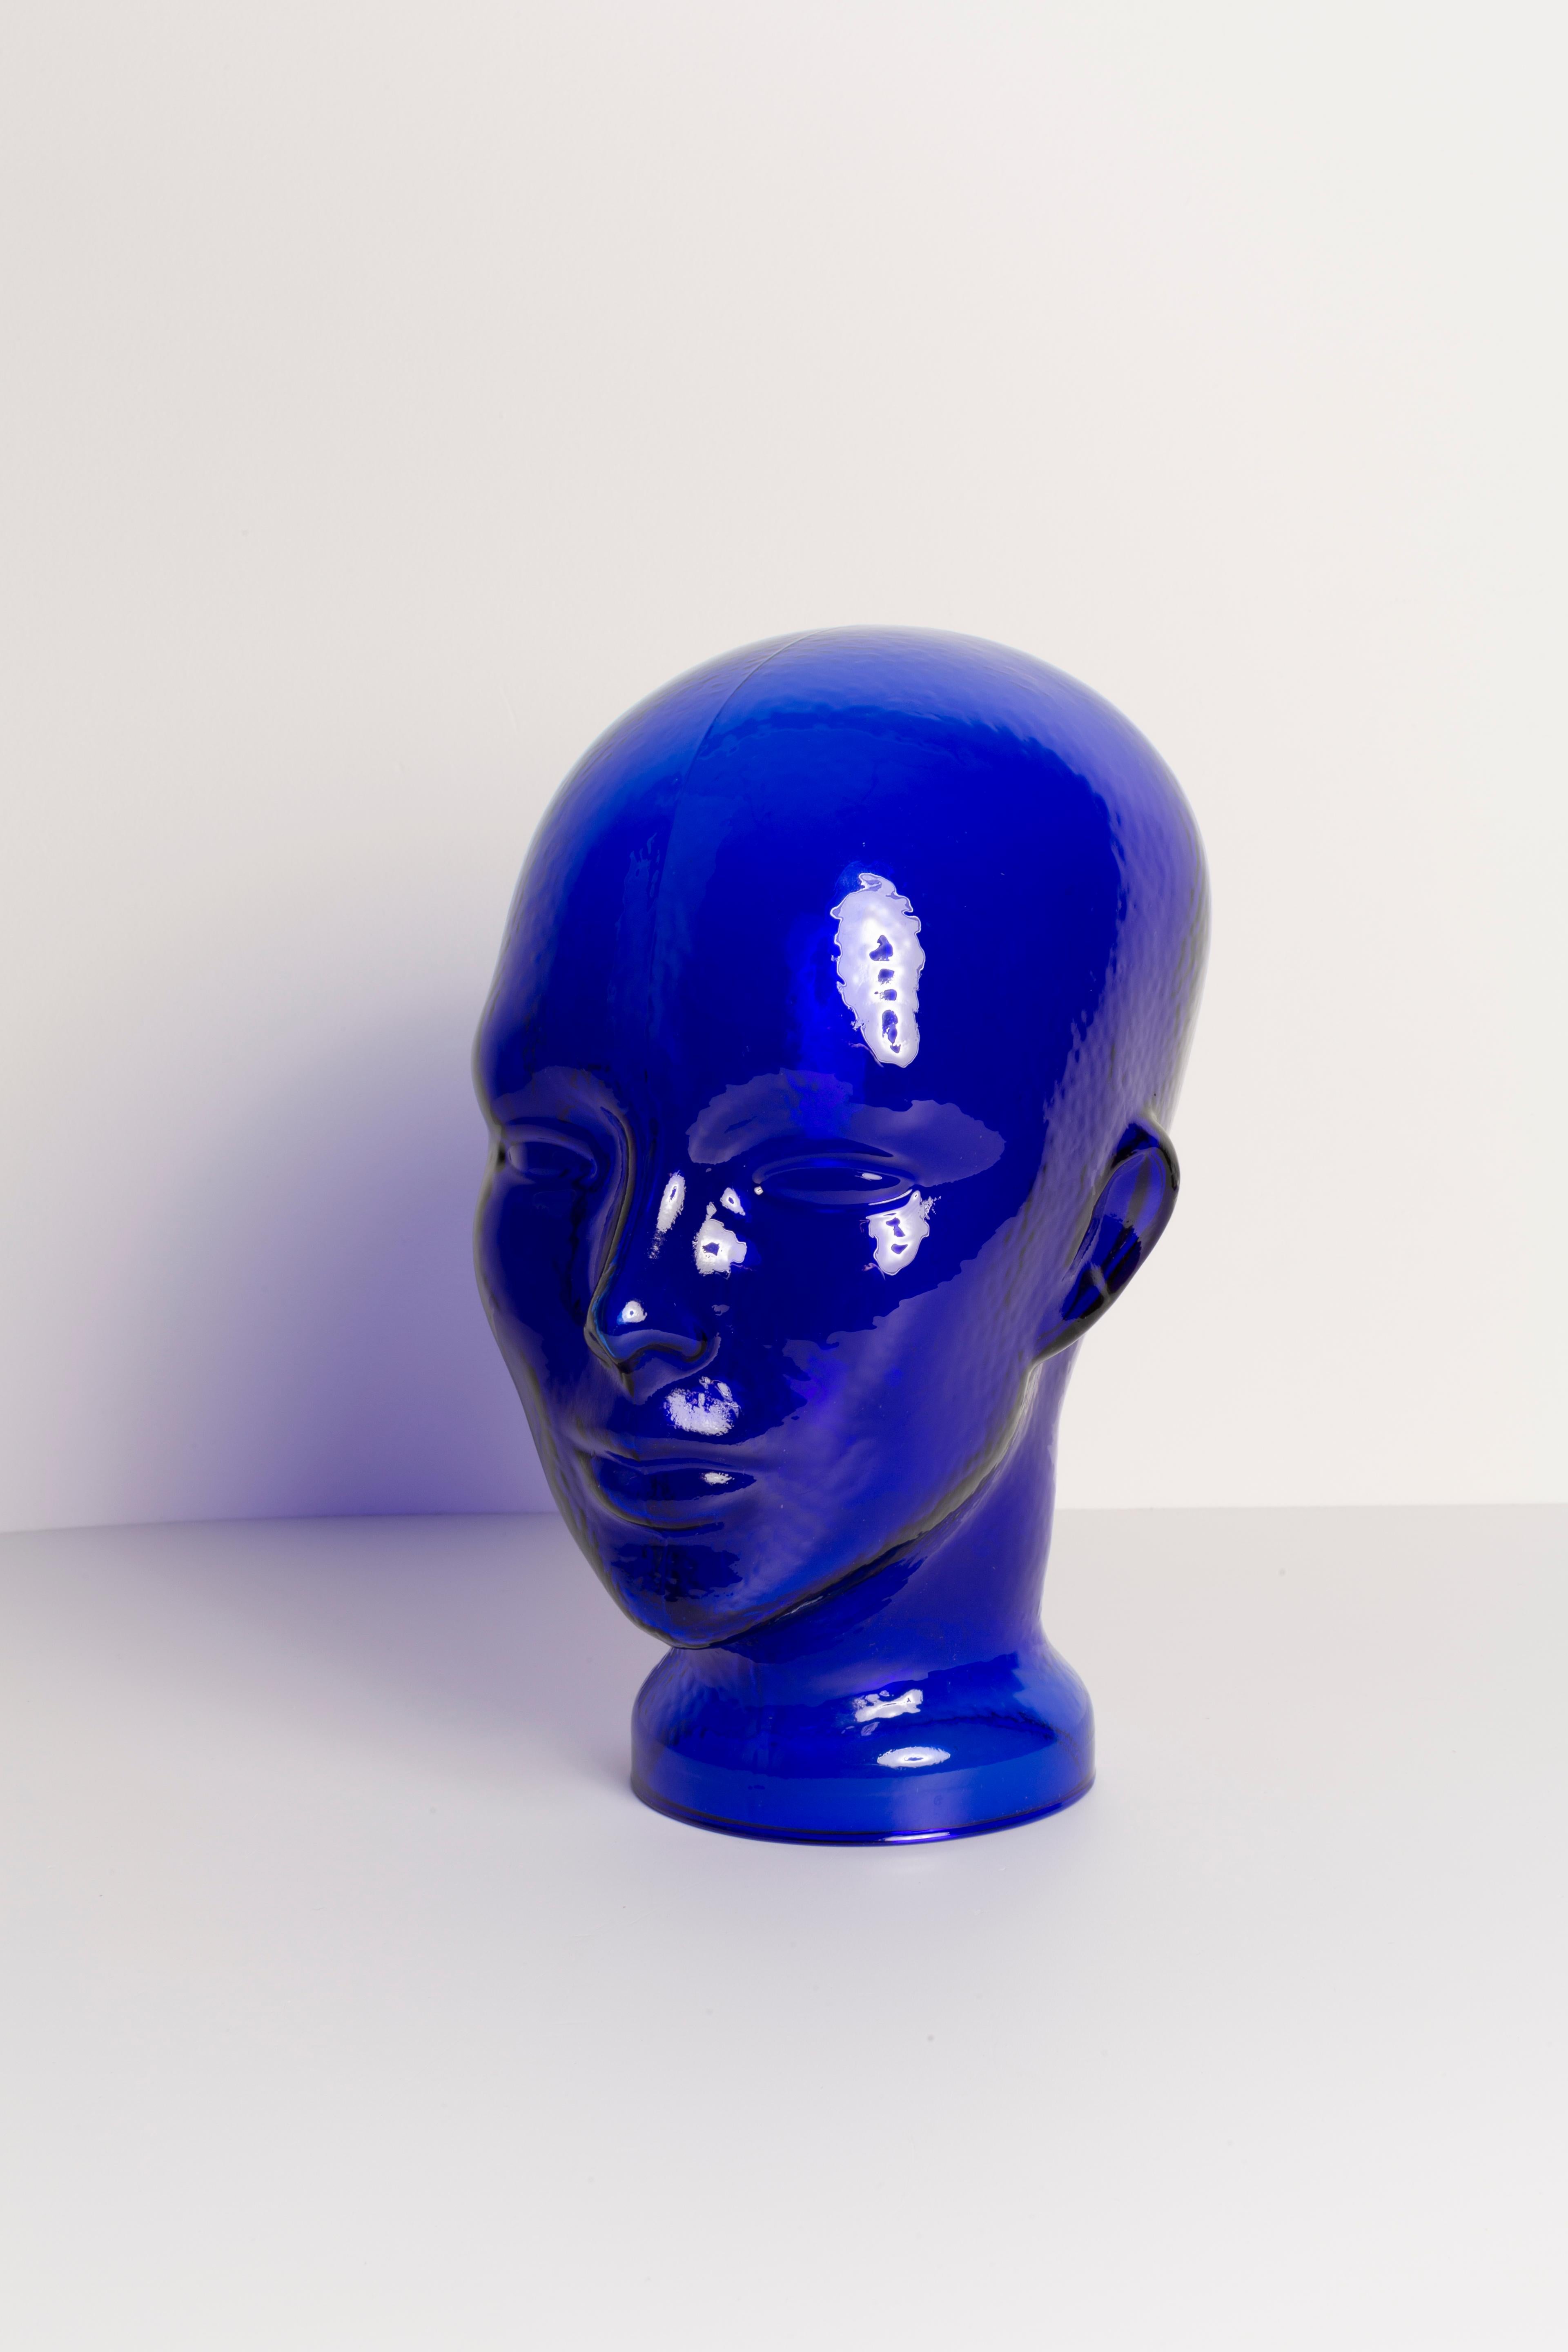 Life-size glass head in a unique deep blue color. Produced in a German steelworks in the 1970s. Perfect condition. A perfect addition to the interior, photo prop, display or headphone stand.